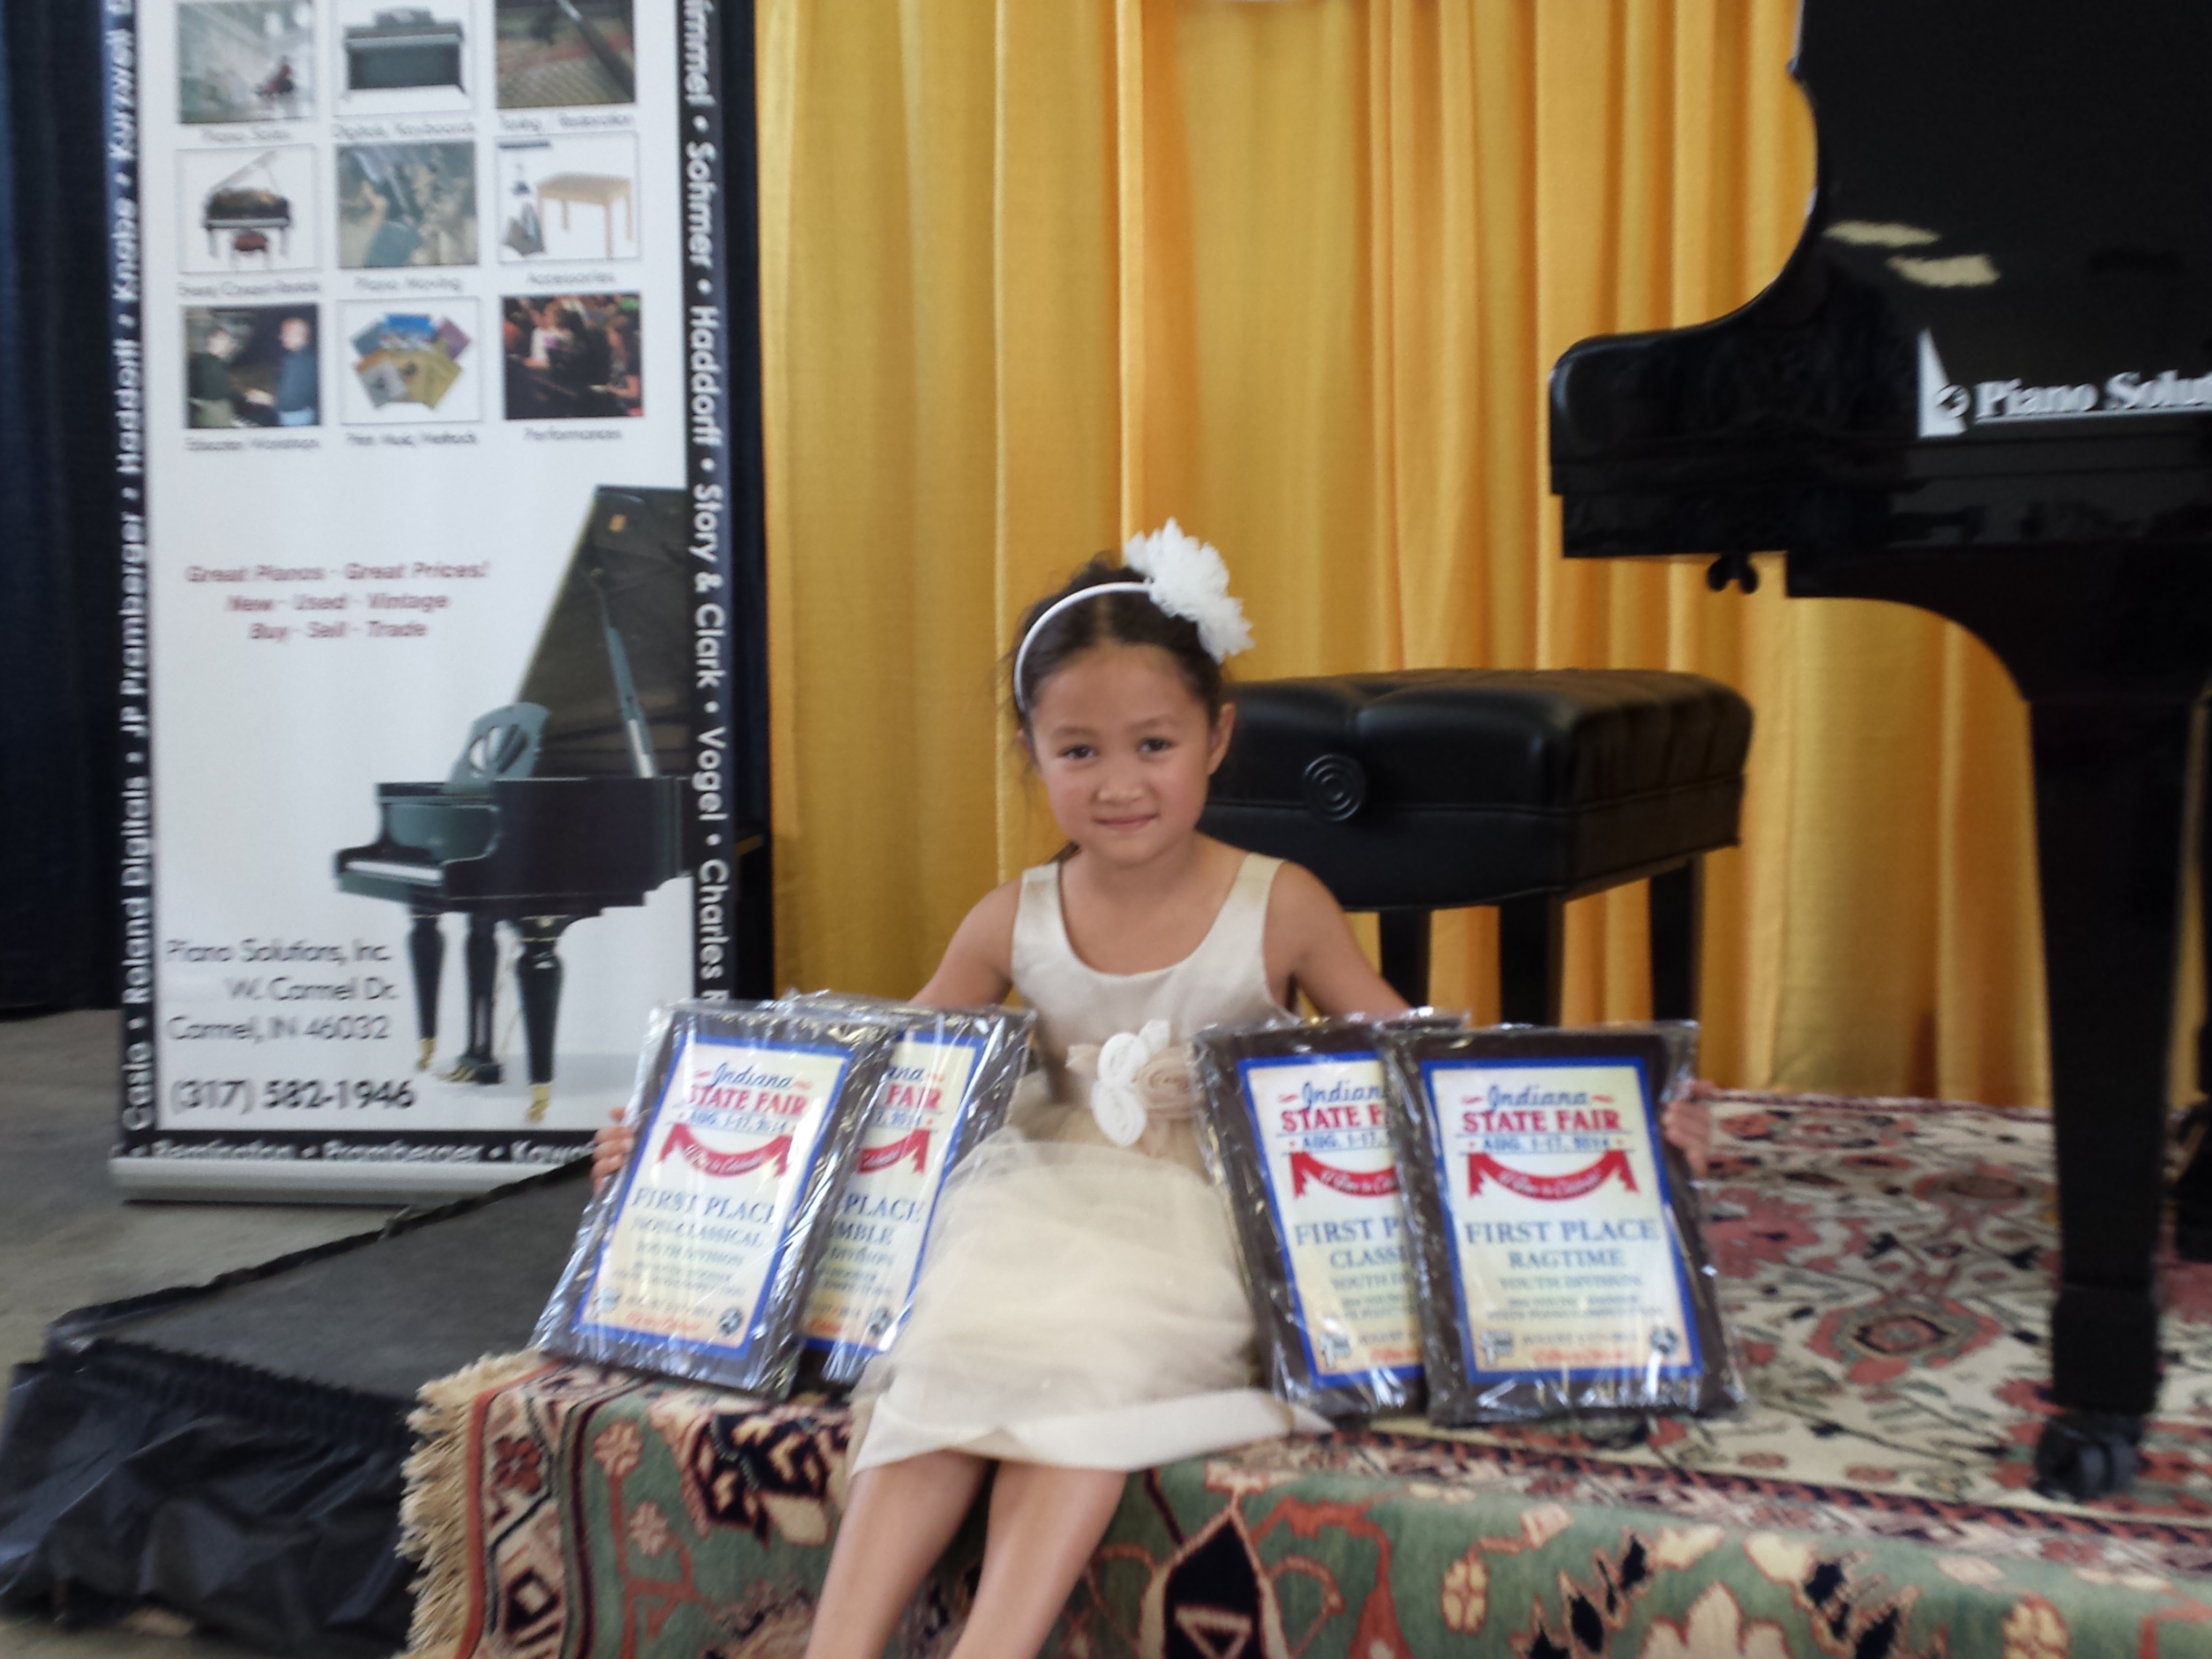 My daughter Jessica (6) of Carmel just placed first in 4 different categories at the 2014 State Fair piano competition. Would it be possible to have this printed?  I could provide more information if needed.